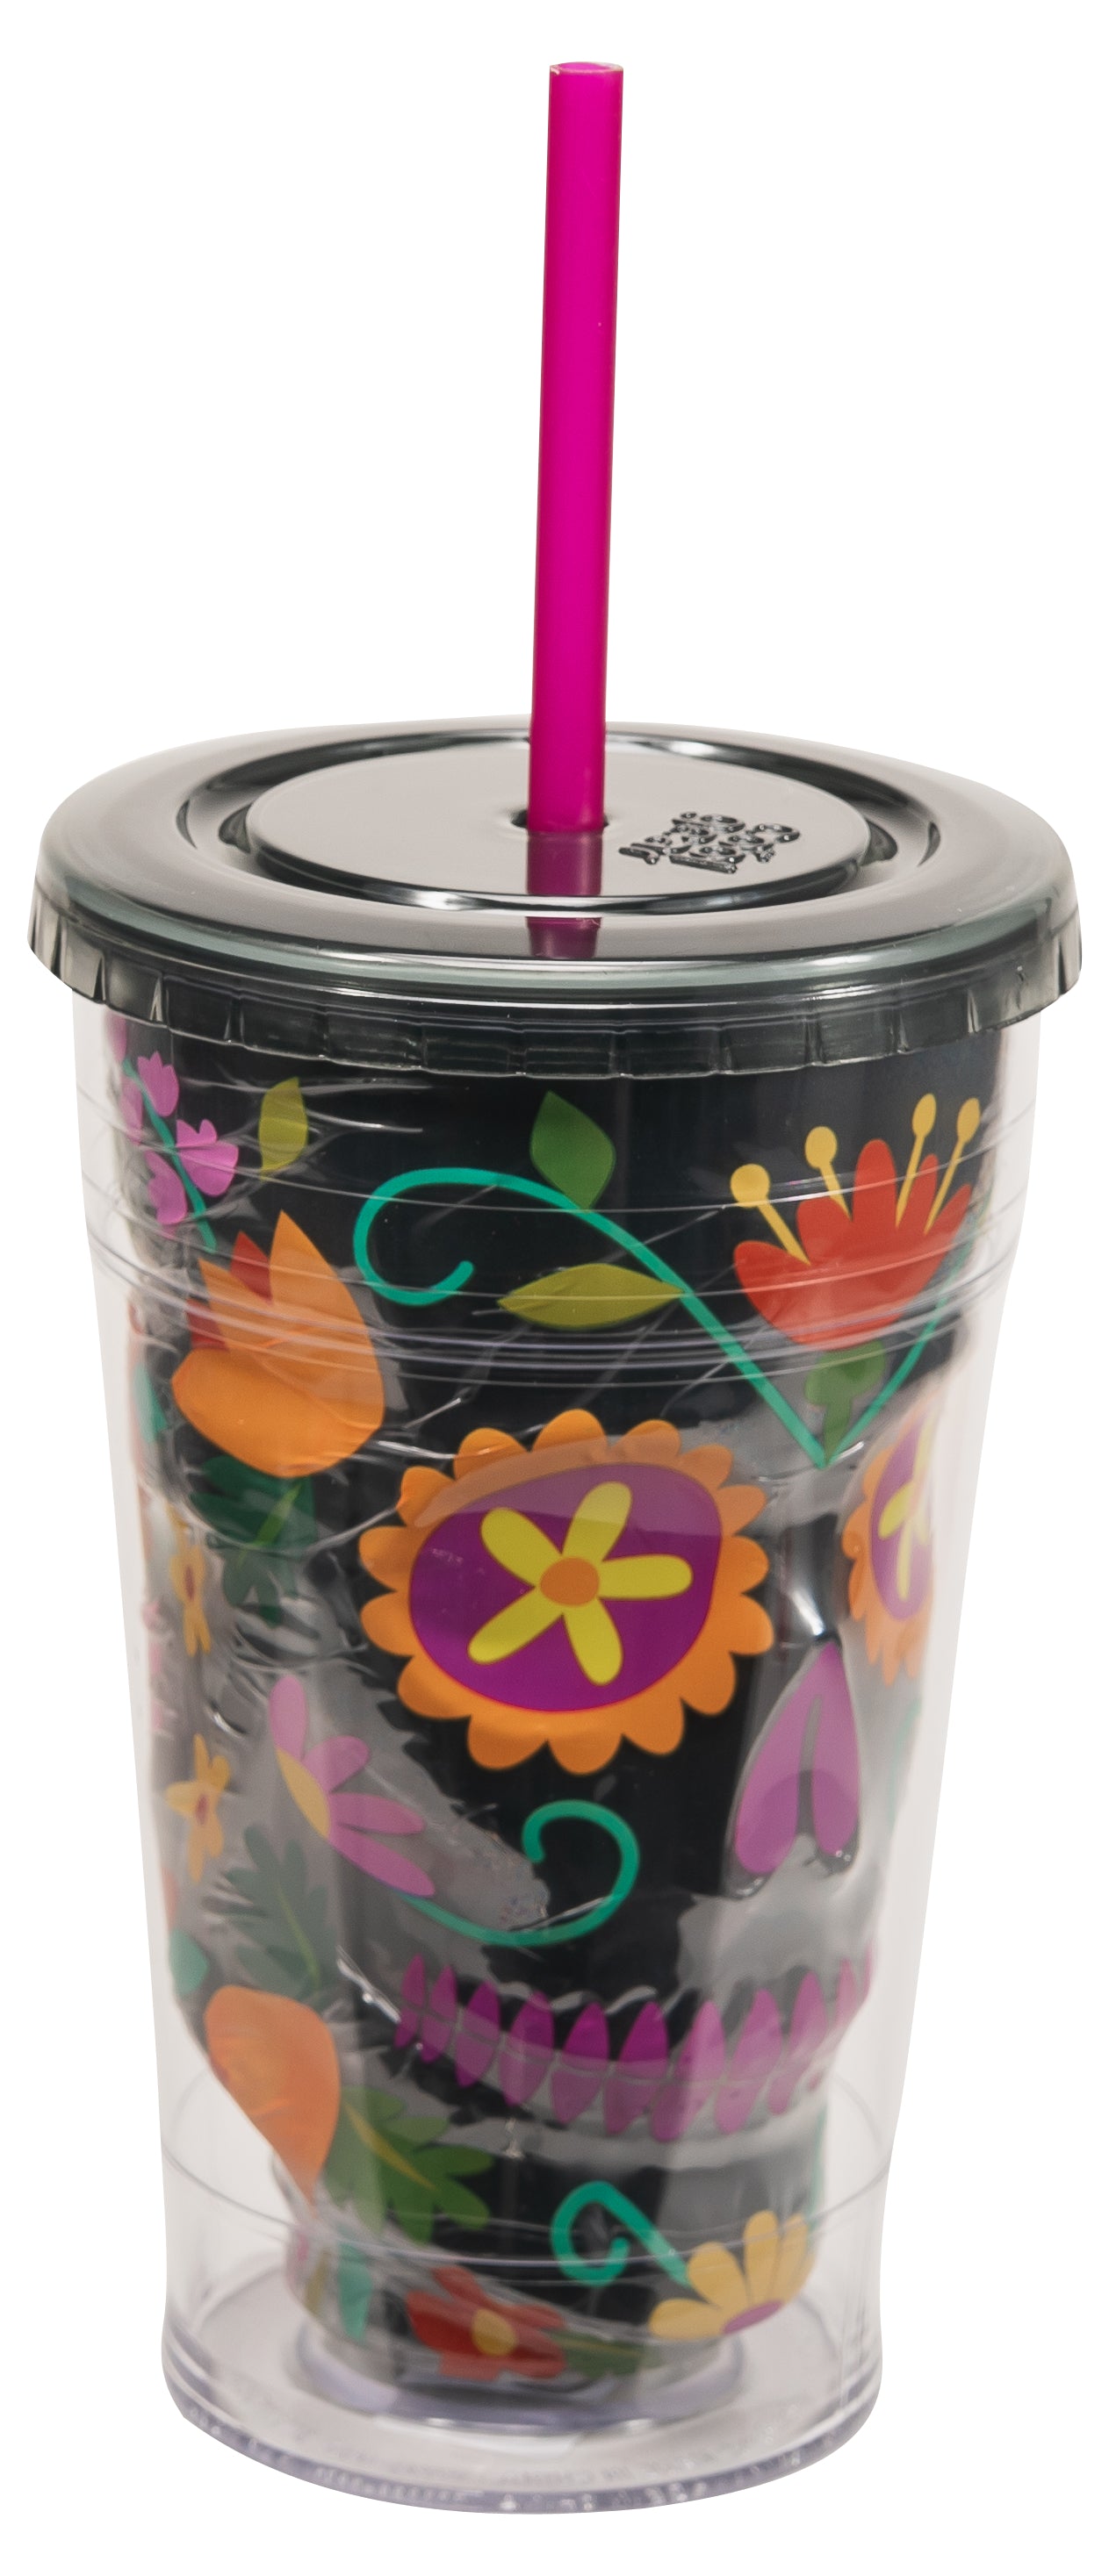 COOL GEAR 2-Pack 18 oz Skull Chiller Tumbler | Black & White Sugar Skull Design Tumblers with Twist Off Lid and Straw